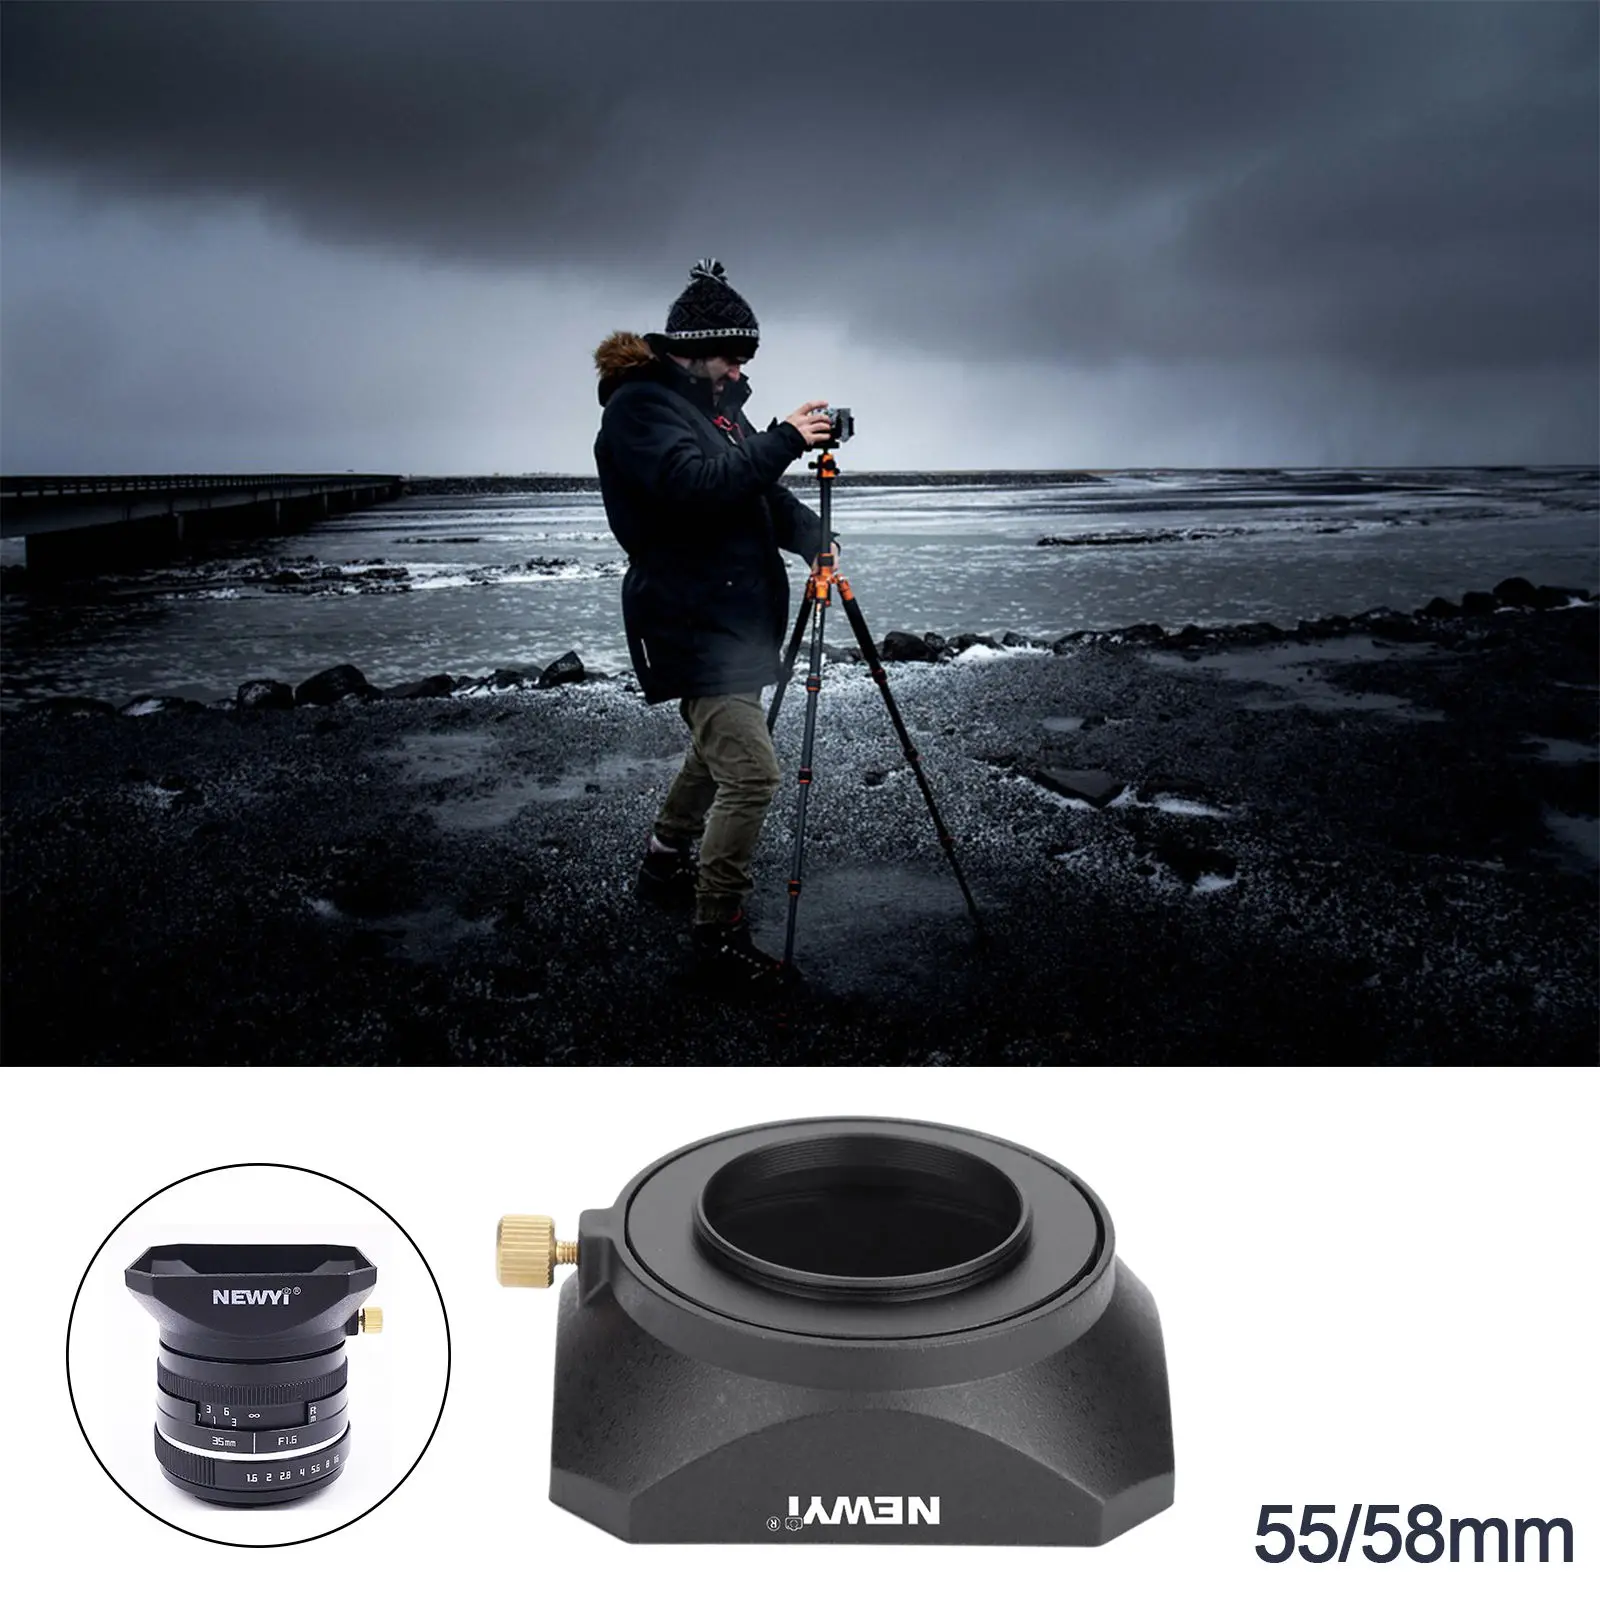 Square Lens Hood Shade with Screw Mount Plastic Protector Reduce Interference Light for DSLR Mirrorless Camera